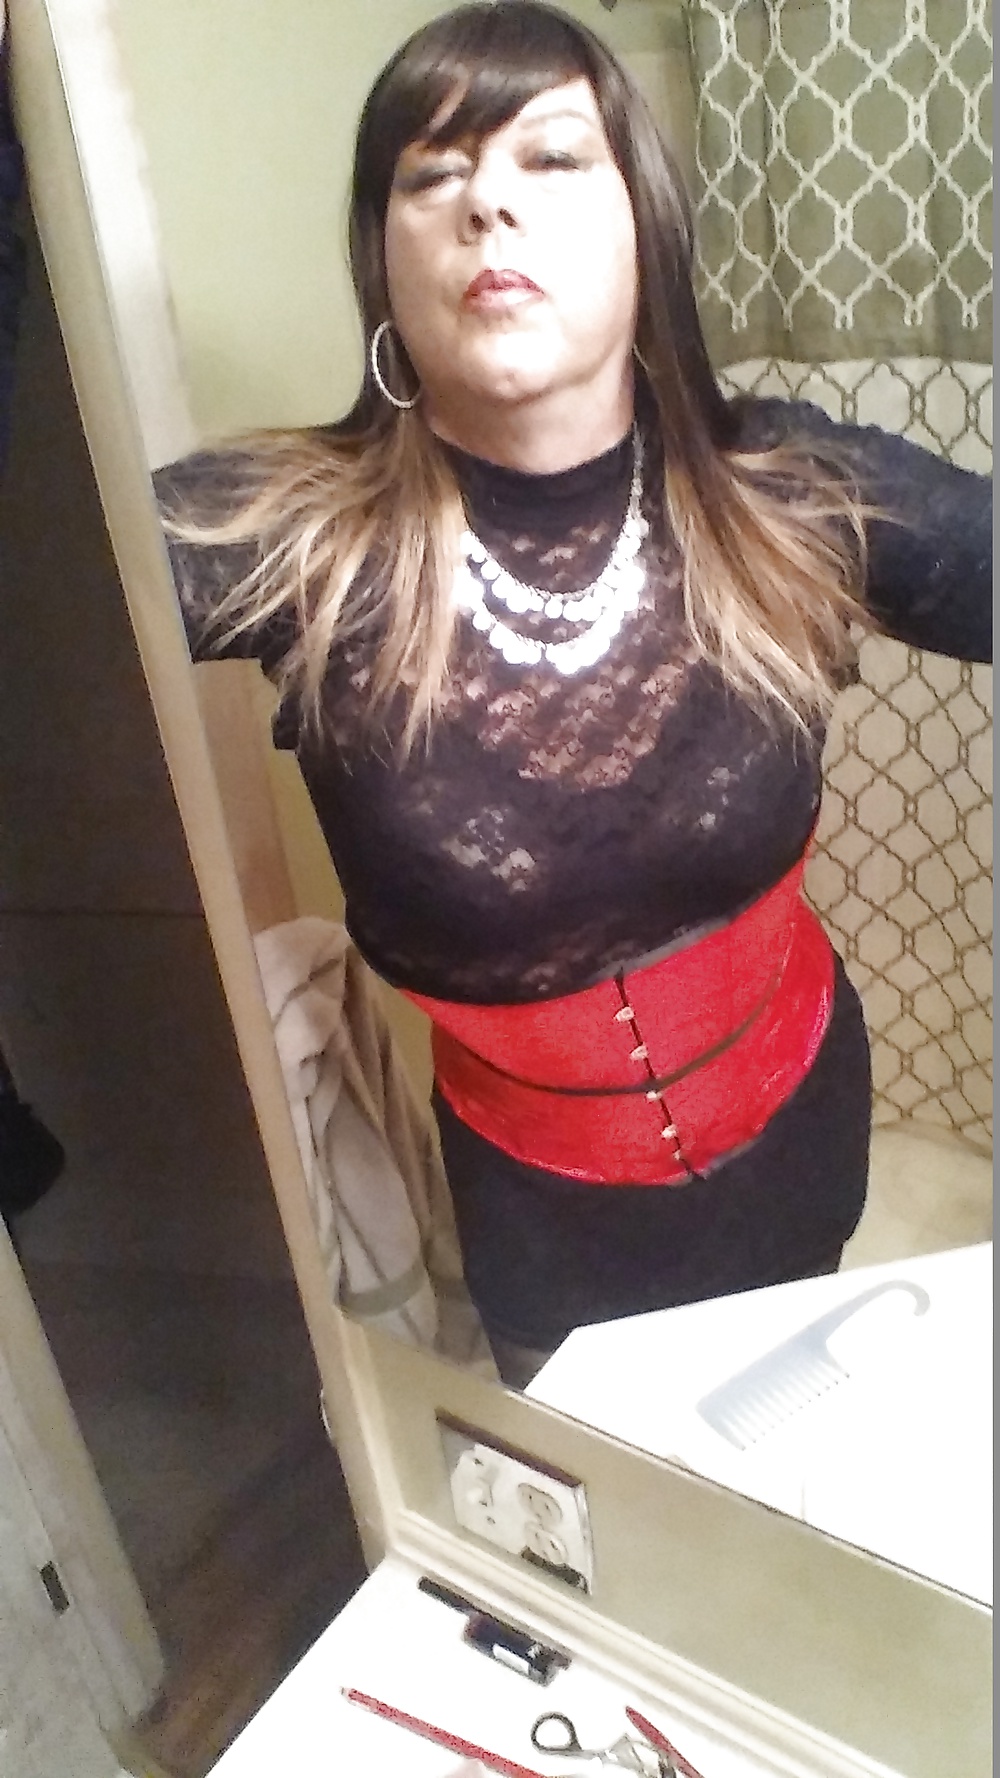 New Dress and Red Corset